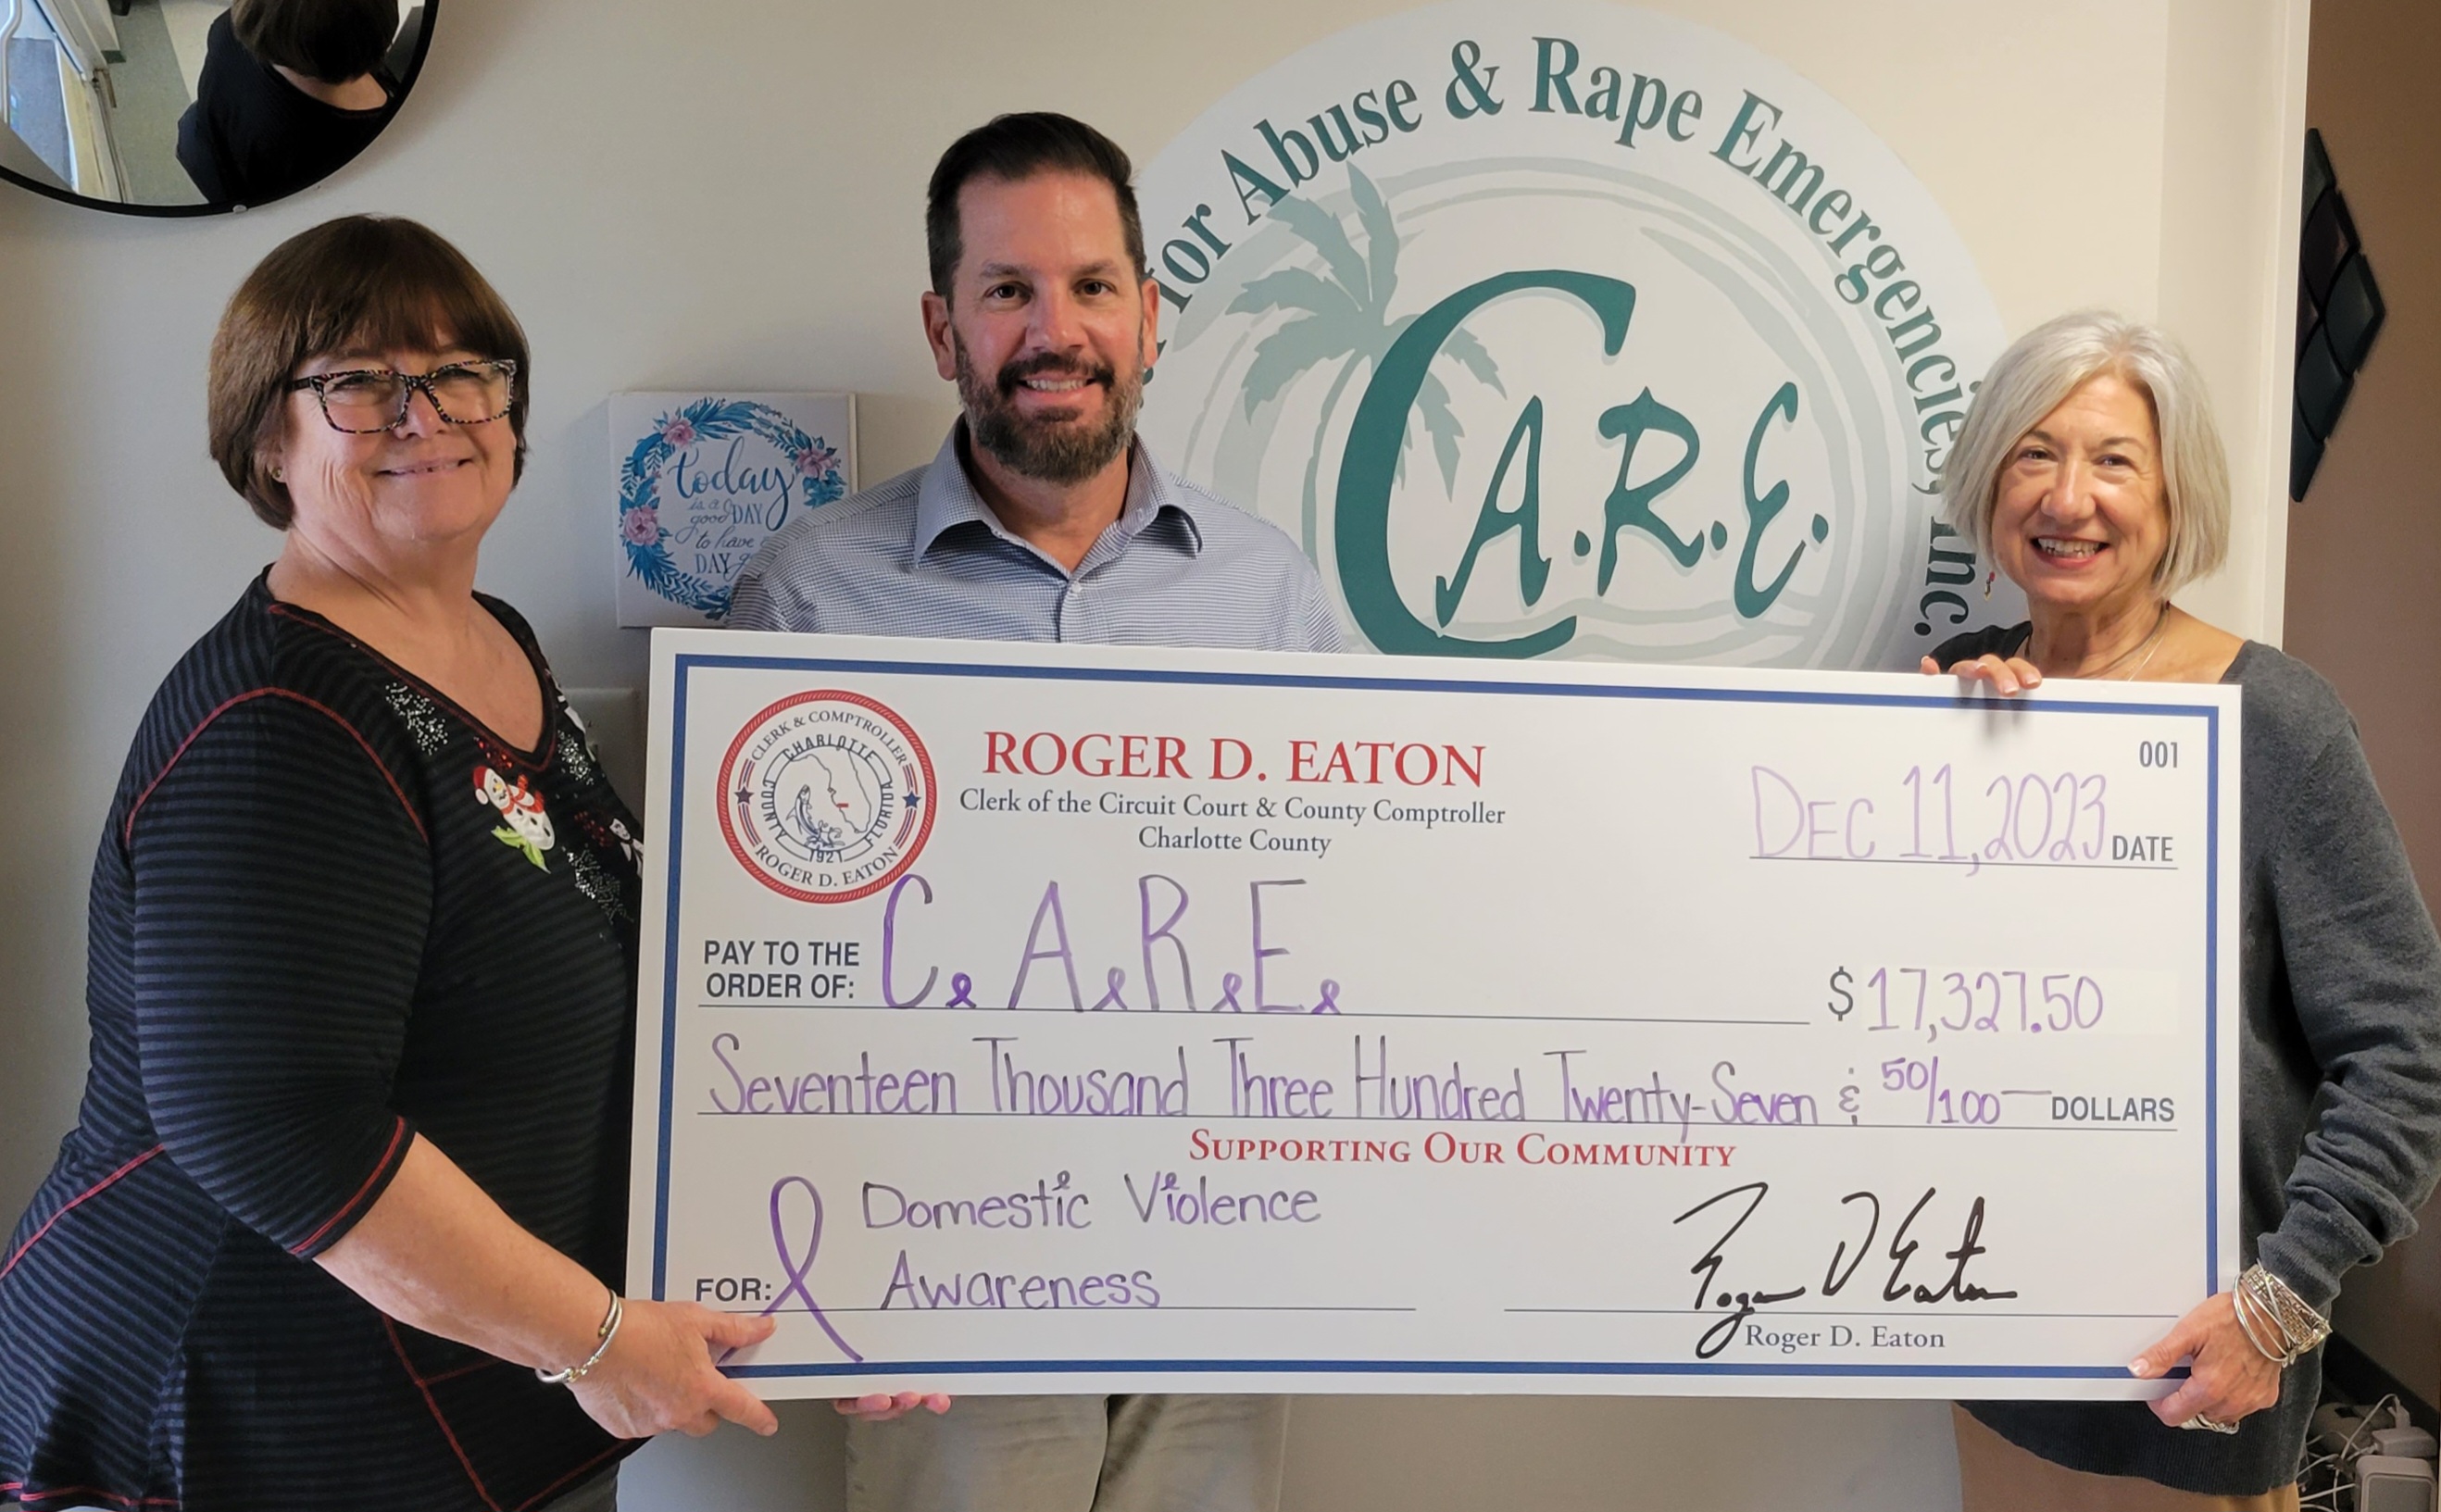 Roger D. Eaton, Clerk of the Circuit Court and County Comptroller presents check to CARE.